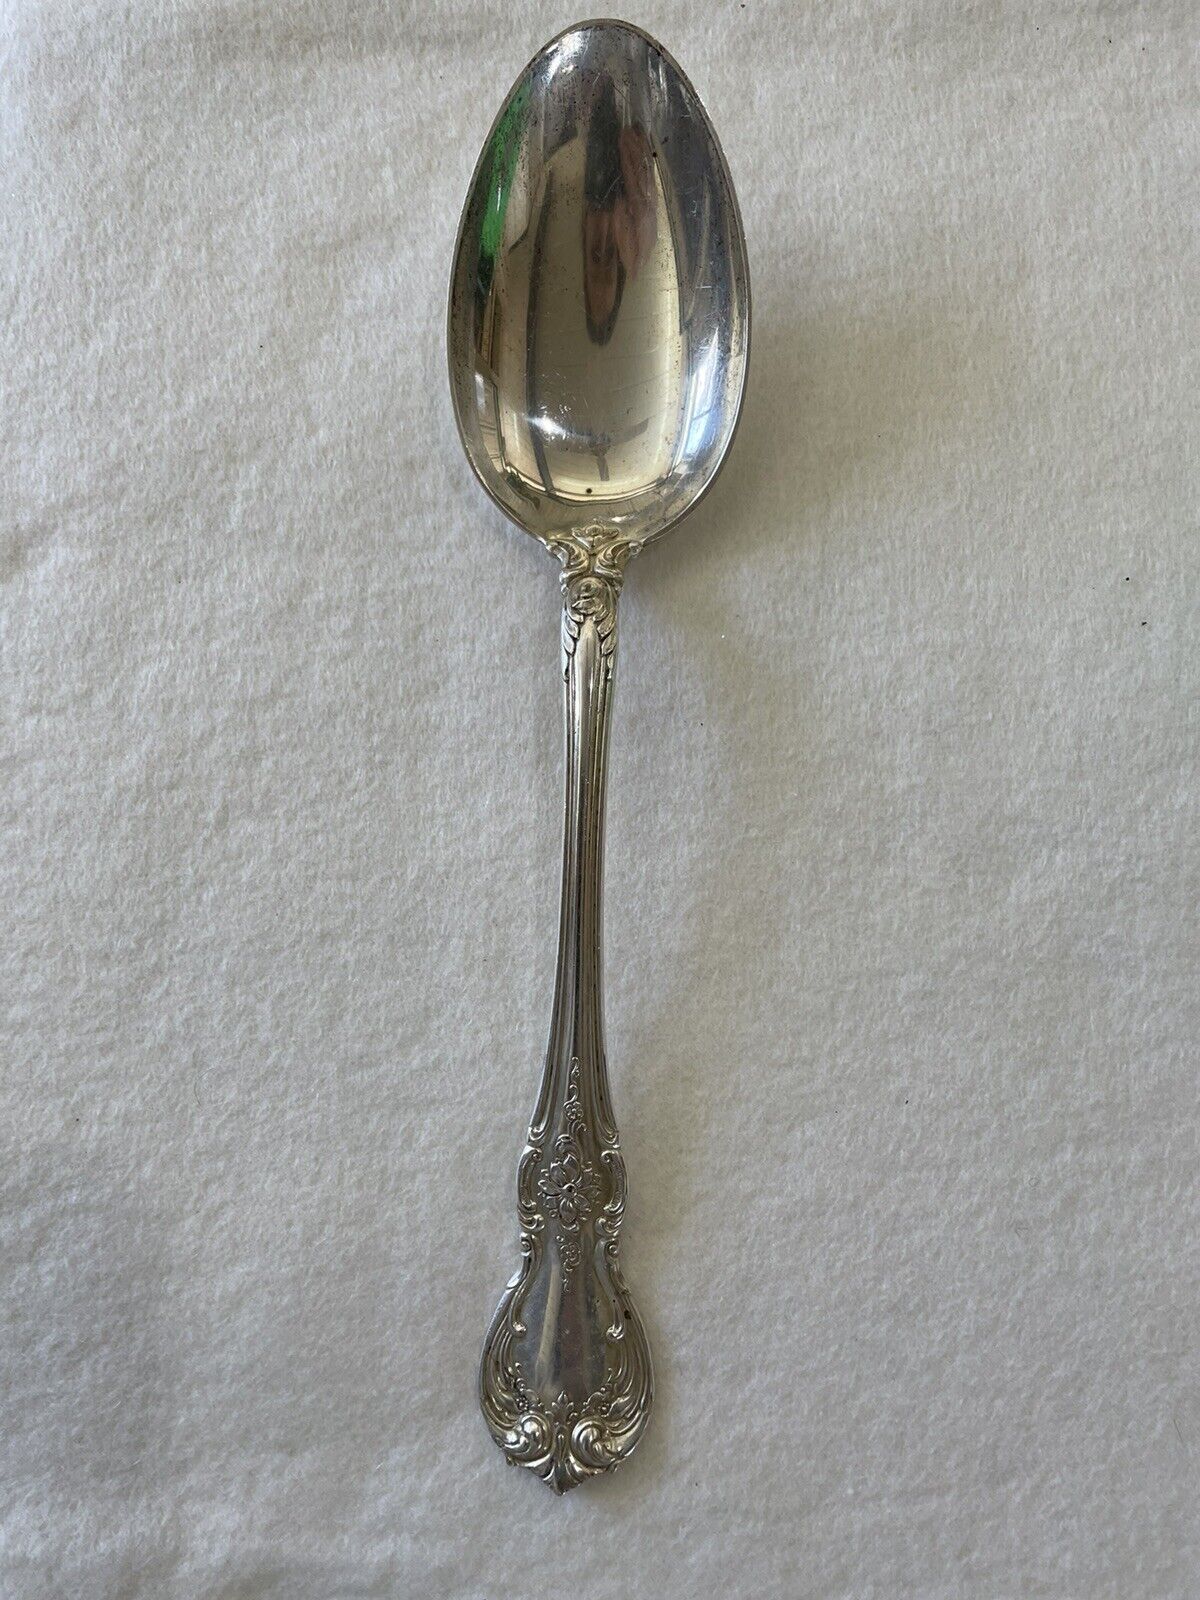 TOWLE Old Master Sterling Silver Large TABLE SPOON 8 1/2 Not Monogrammed Serving